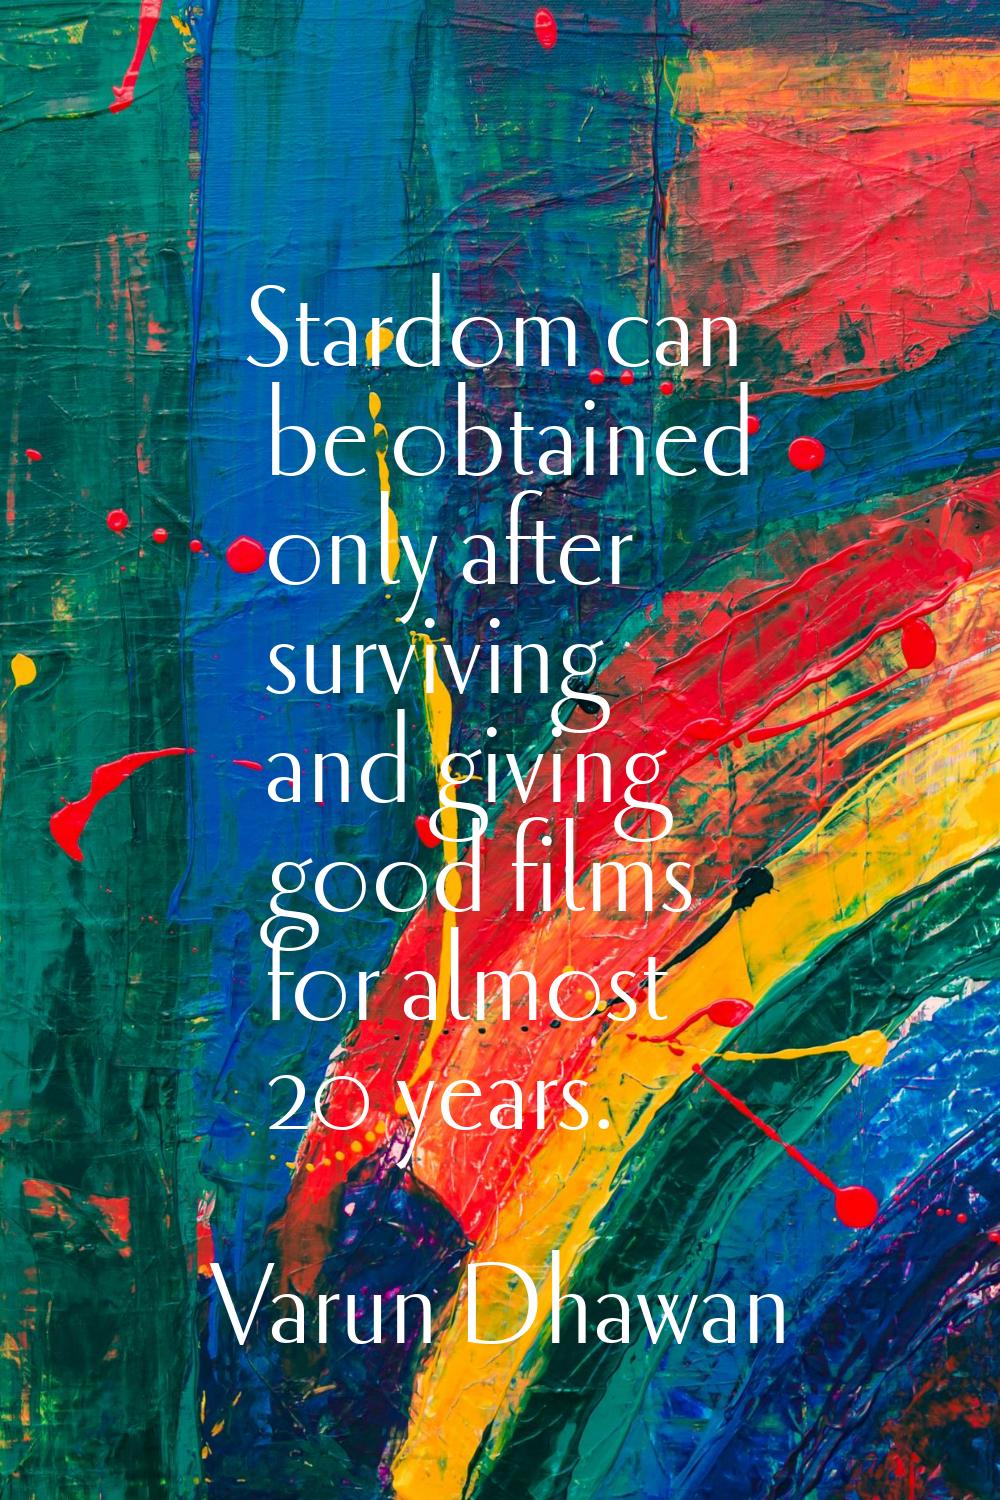 Stardom can be obtained only after surviving and giving good films for almost 20 years.